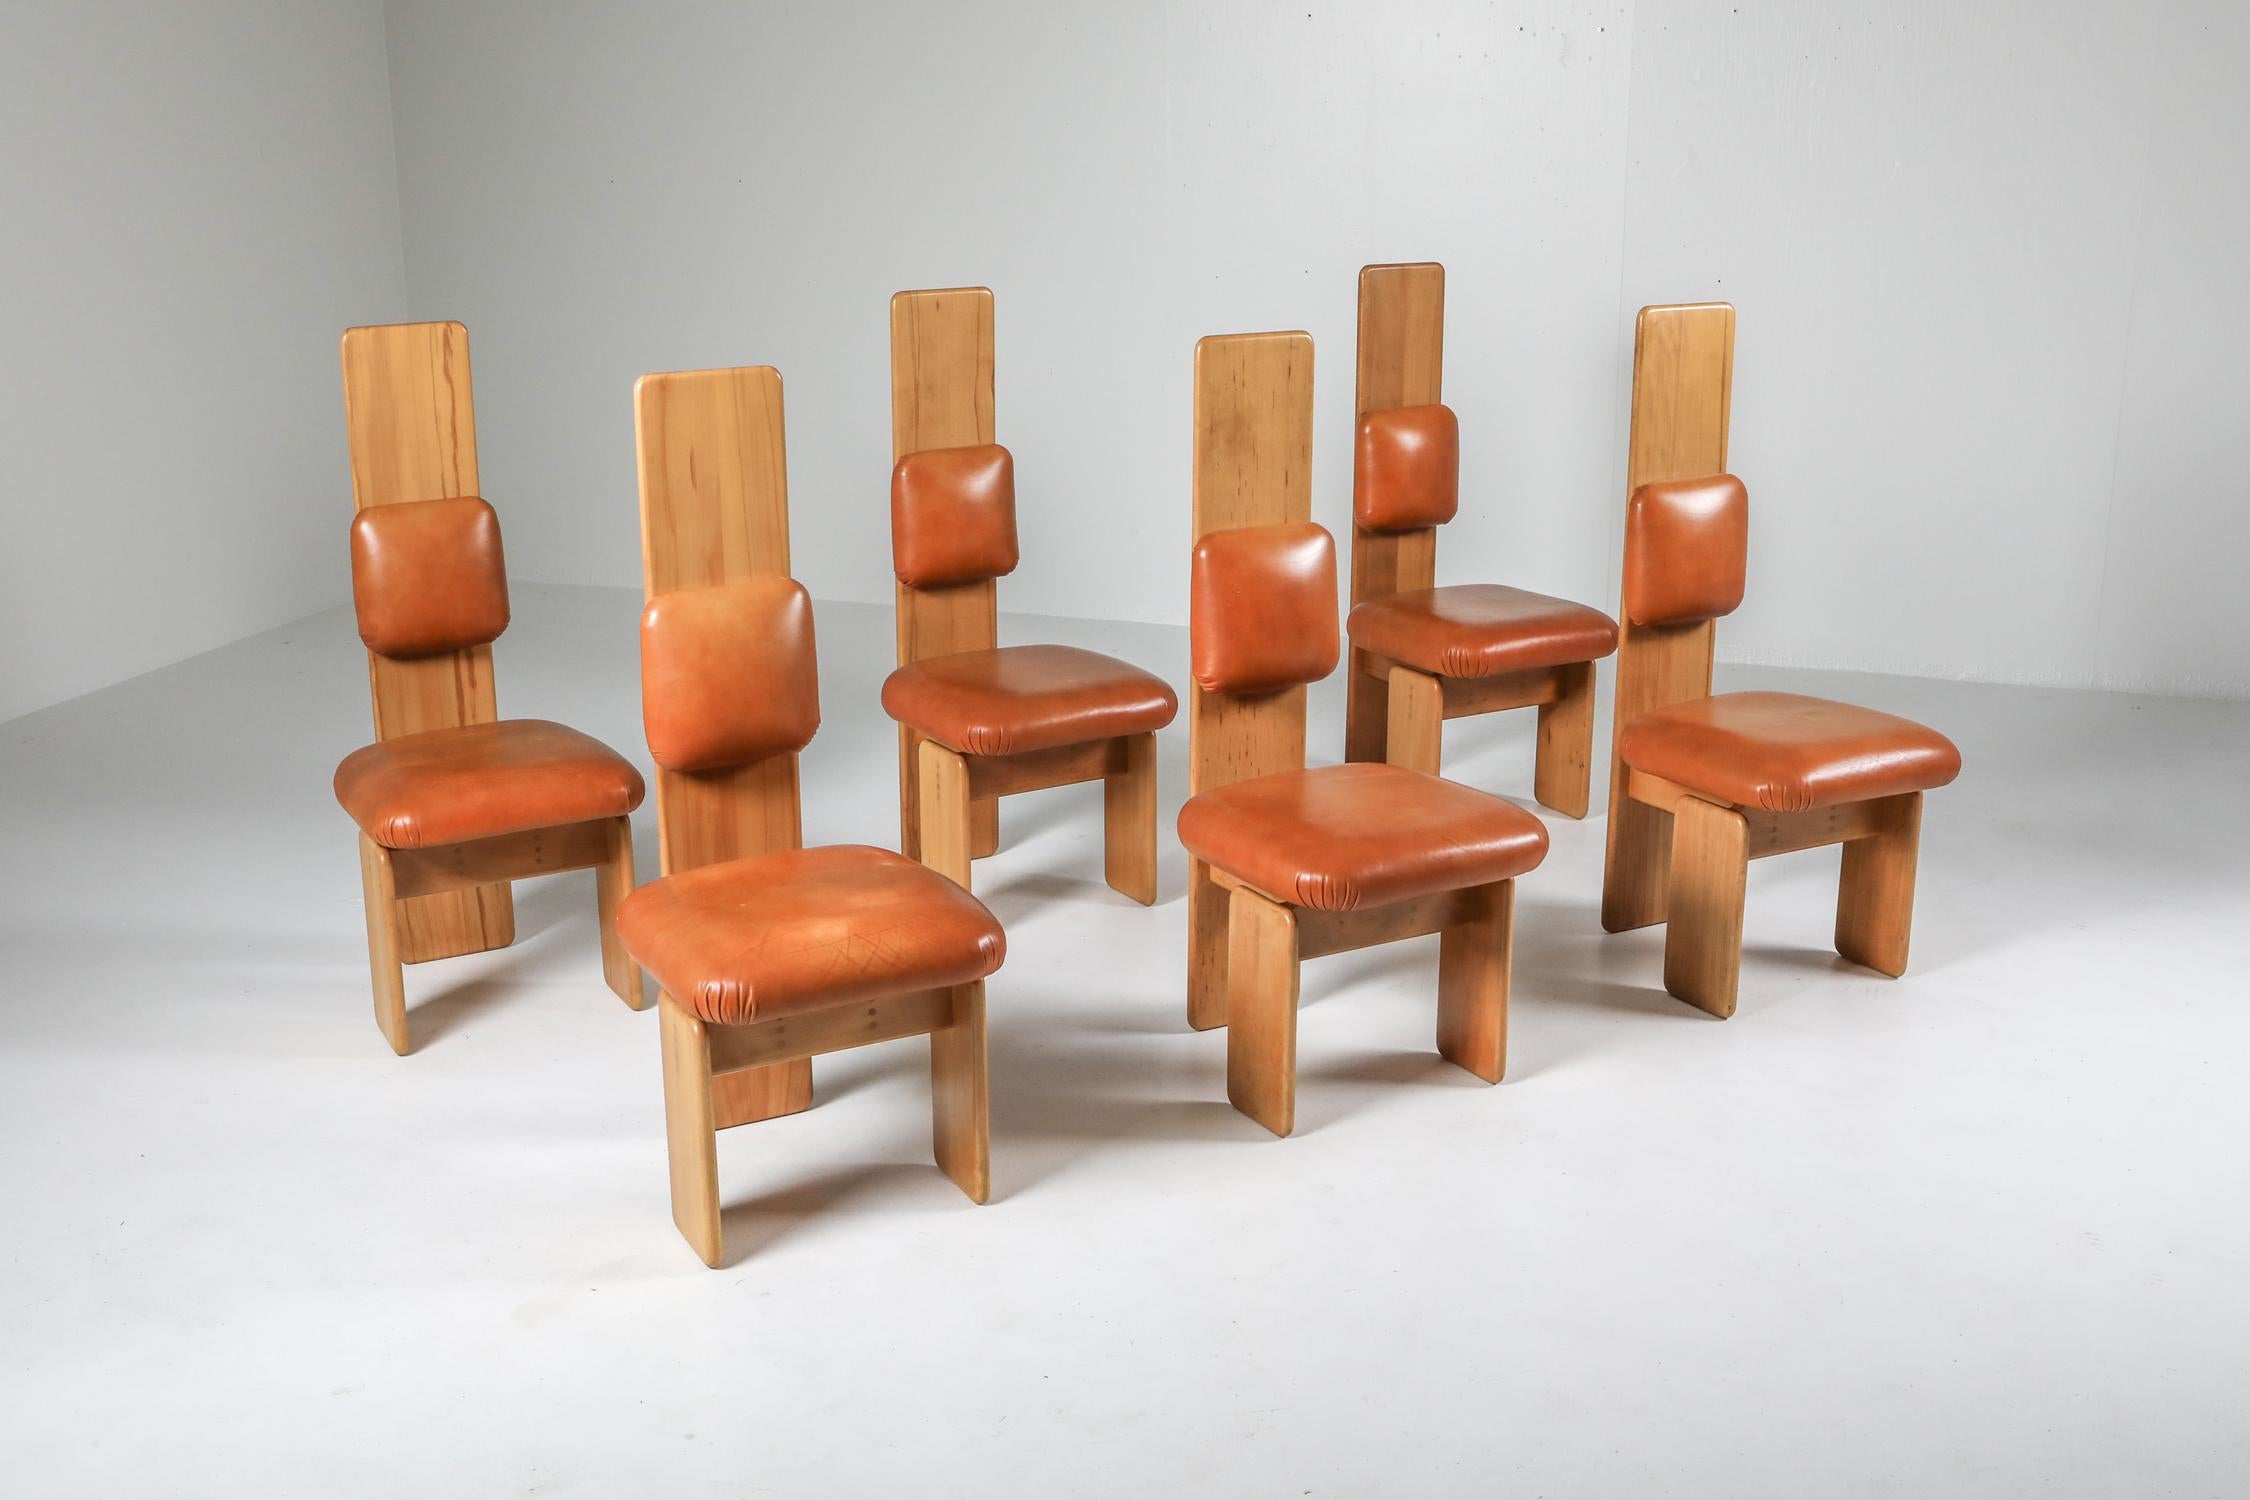 Italian Beech and Leather Dining Chairs by Mario Marenco, Italy, 1970s For Sale